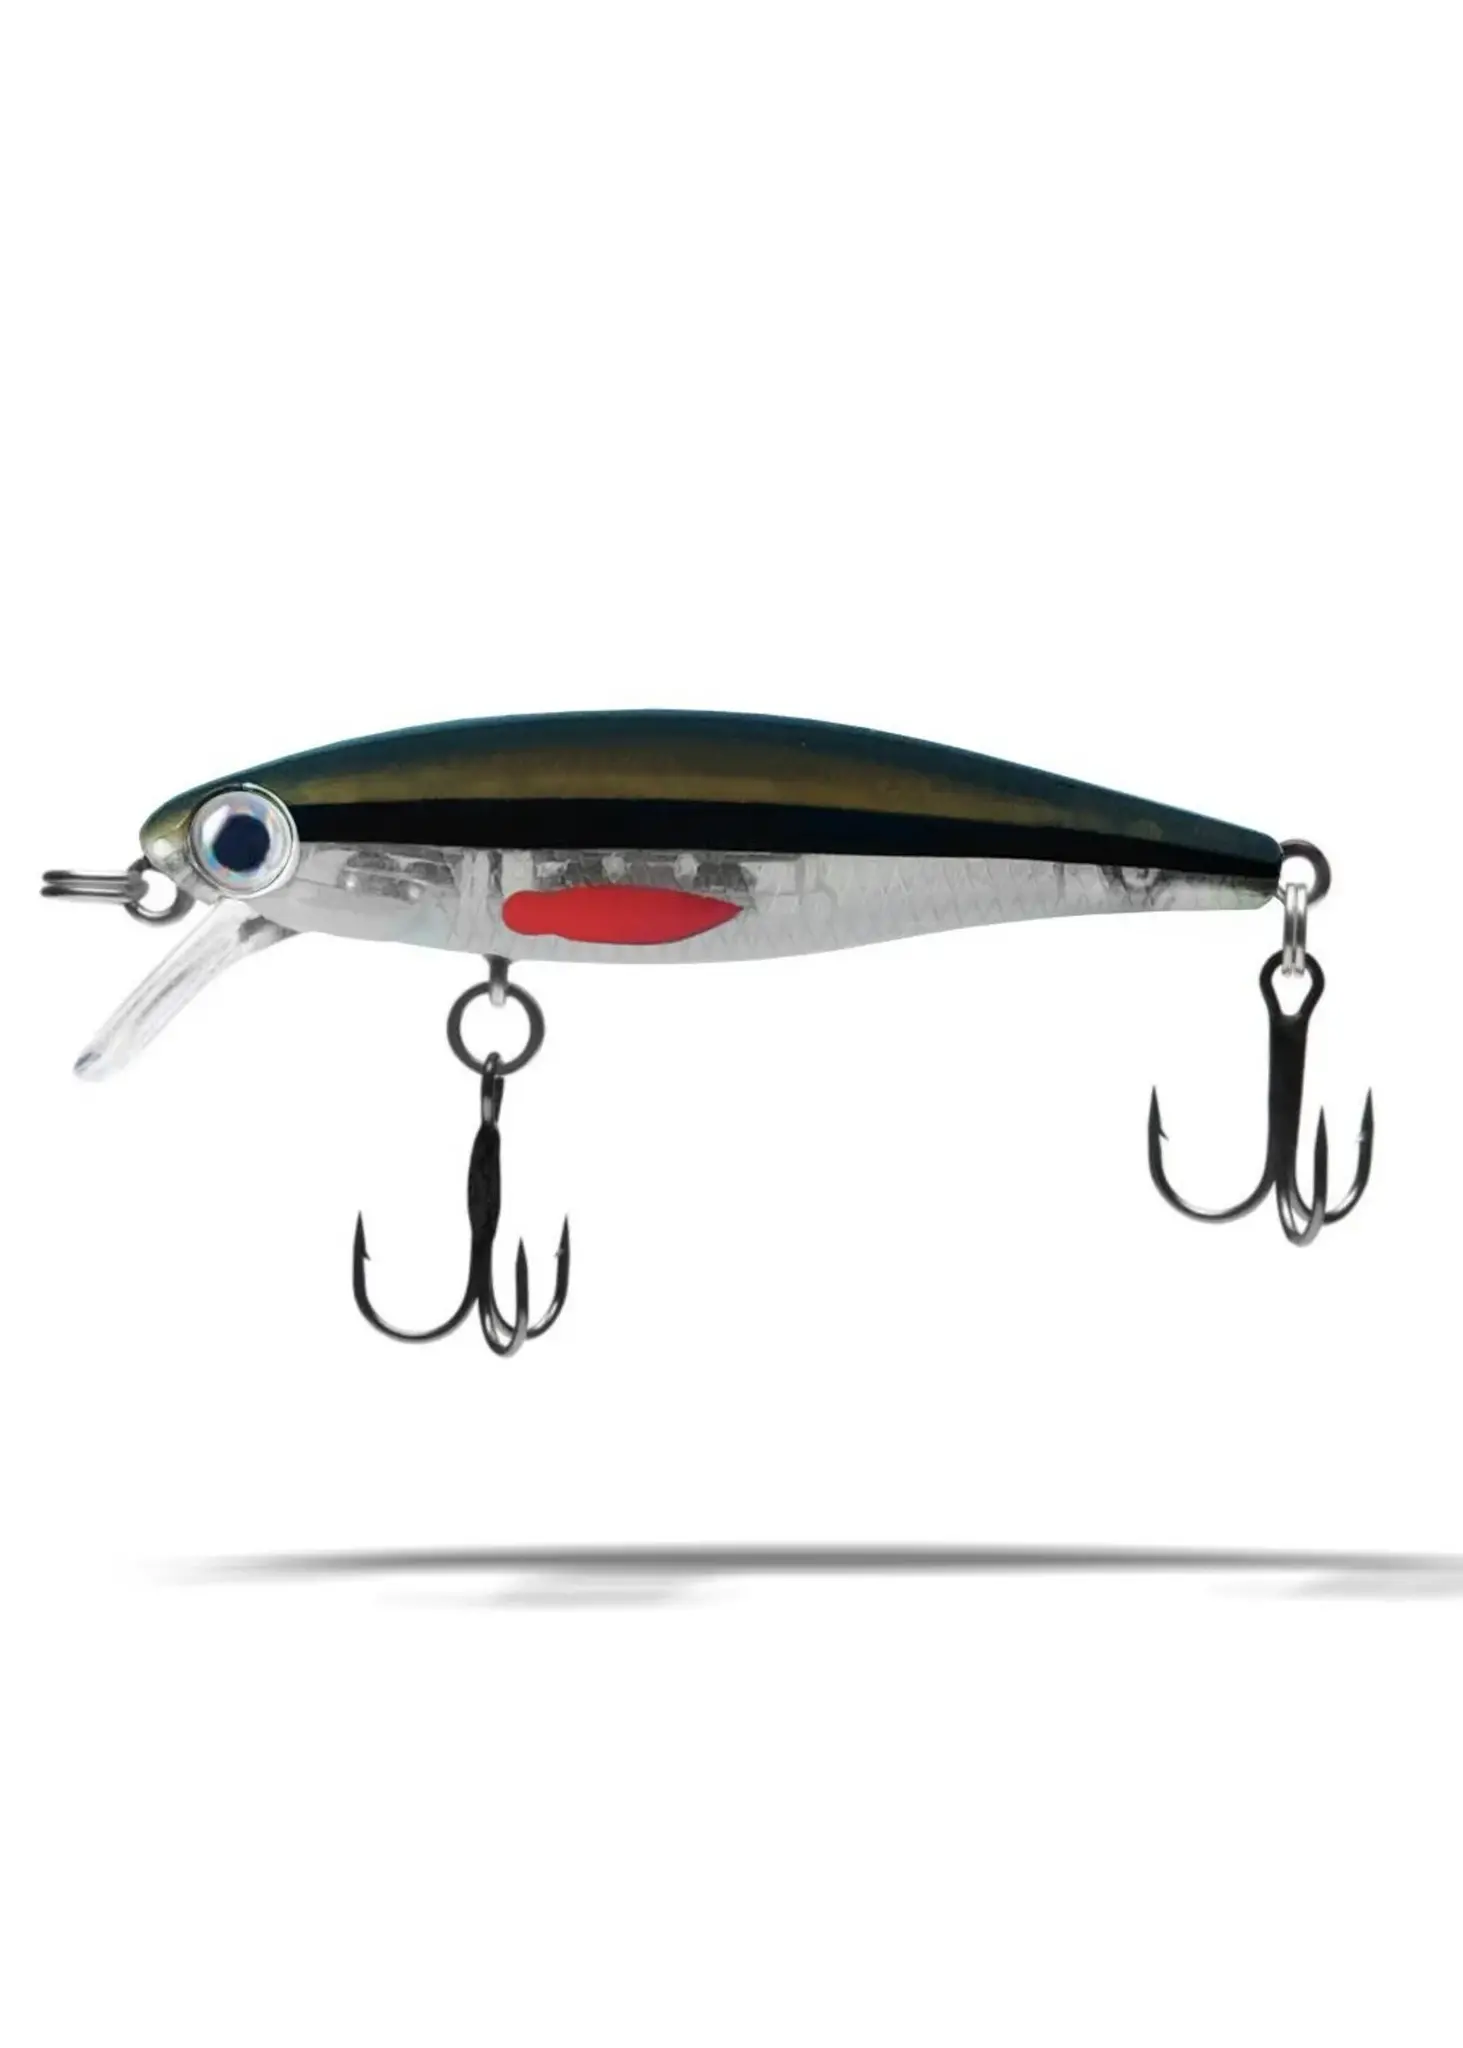 Tackle Shack Top 5 Trout Lures of 2023 - Tackle Shack